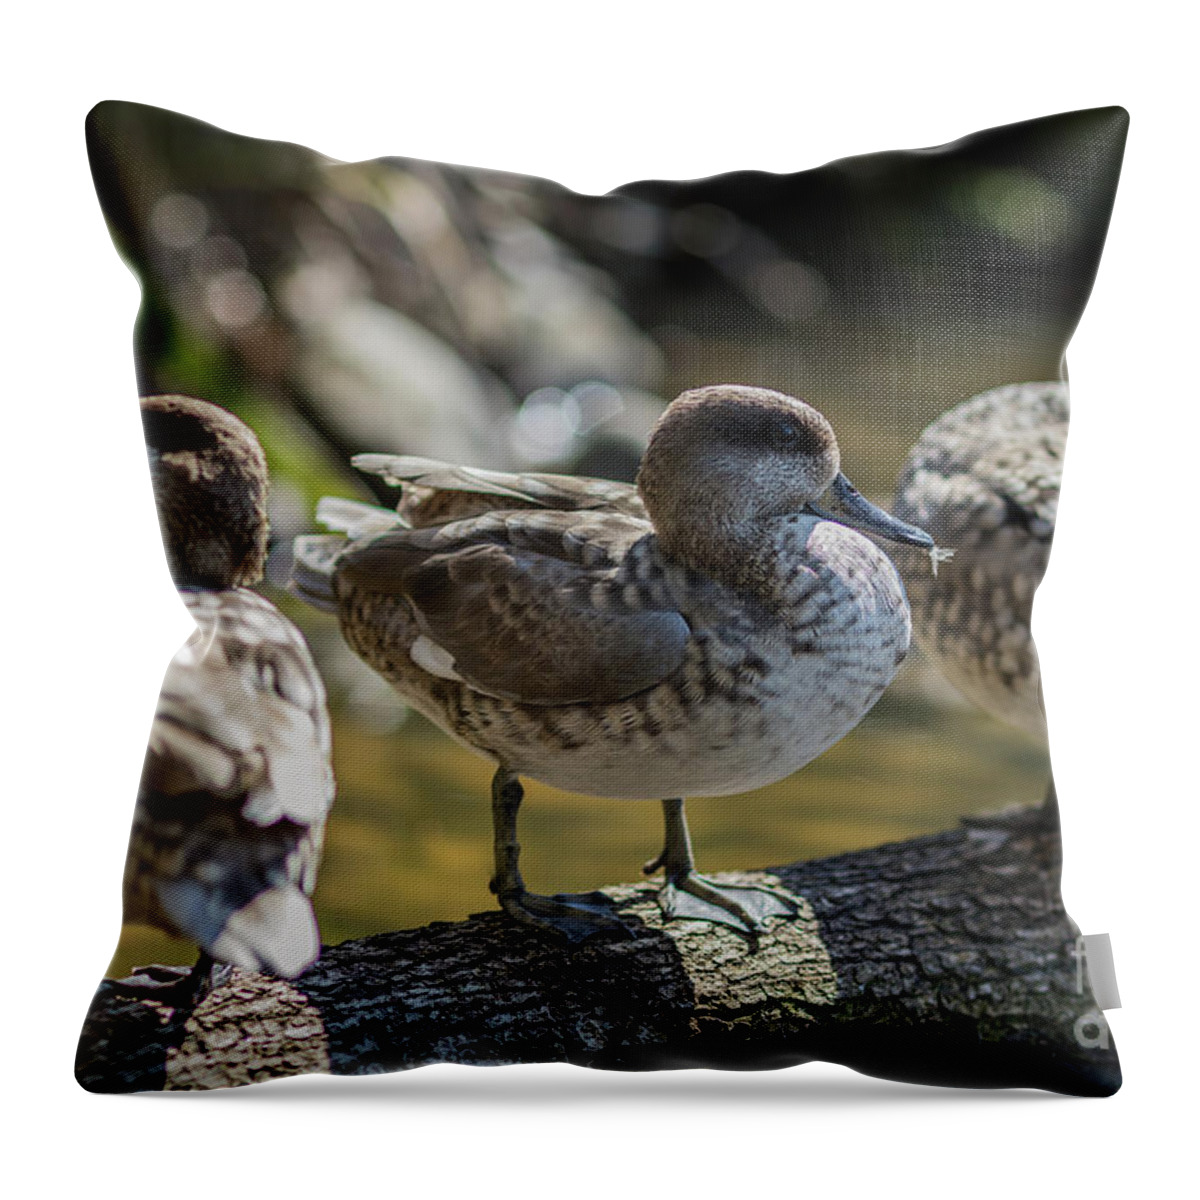 Marbled Ducks Throw Pillow featuring the photograph Marbled Ducks by Eva Lechner